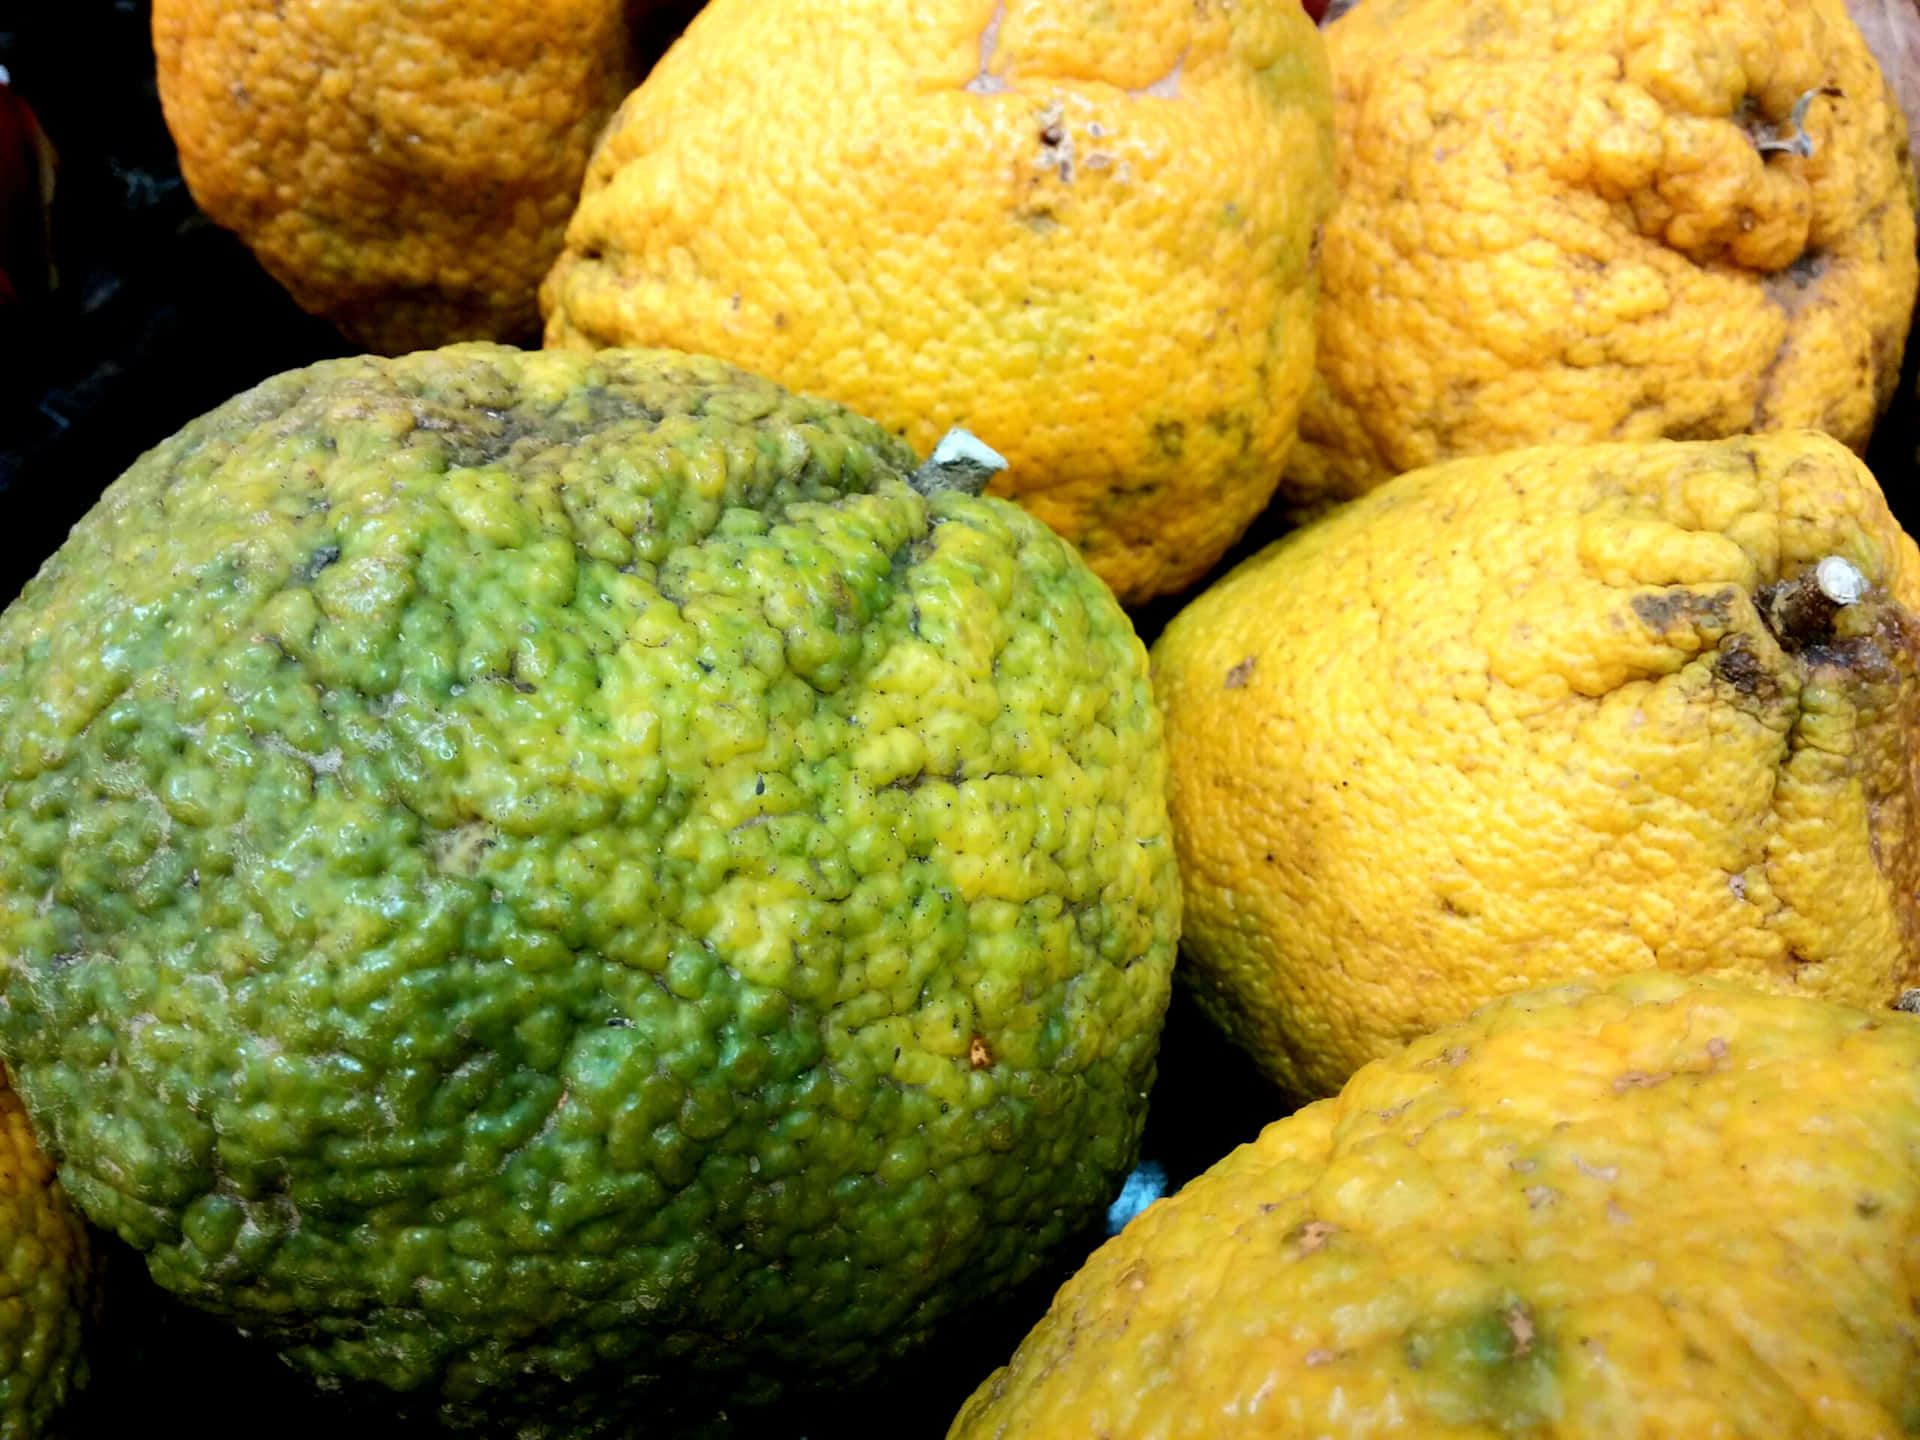 Close-up view of ripe green and yellow Ugli fruit Wallpaper